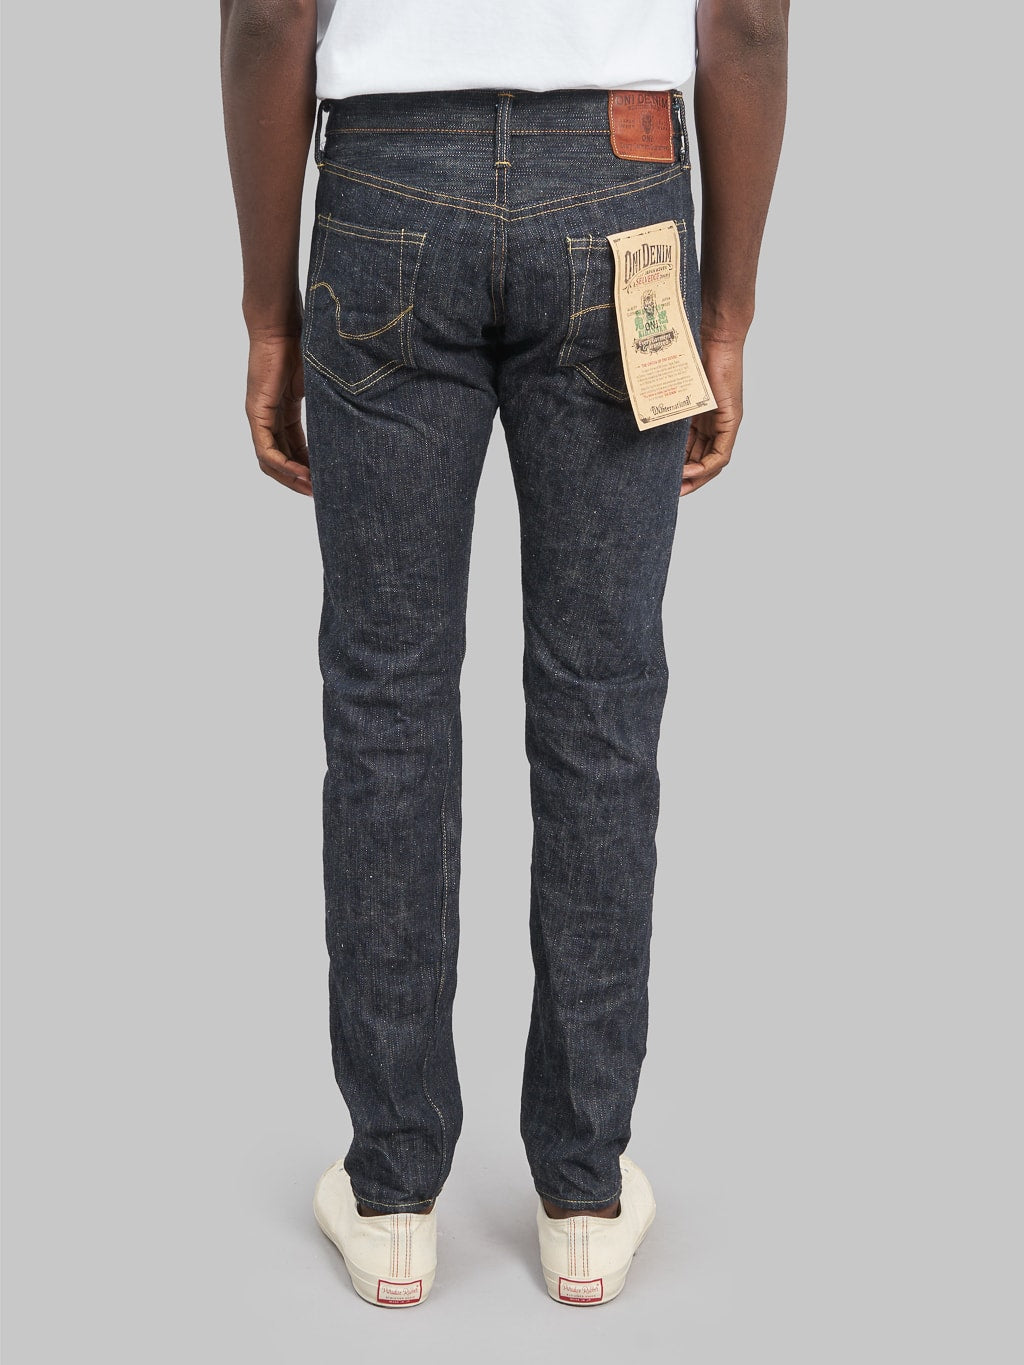 Oni denim kihannen relaxed tapered jeans back rise